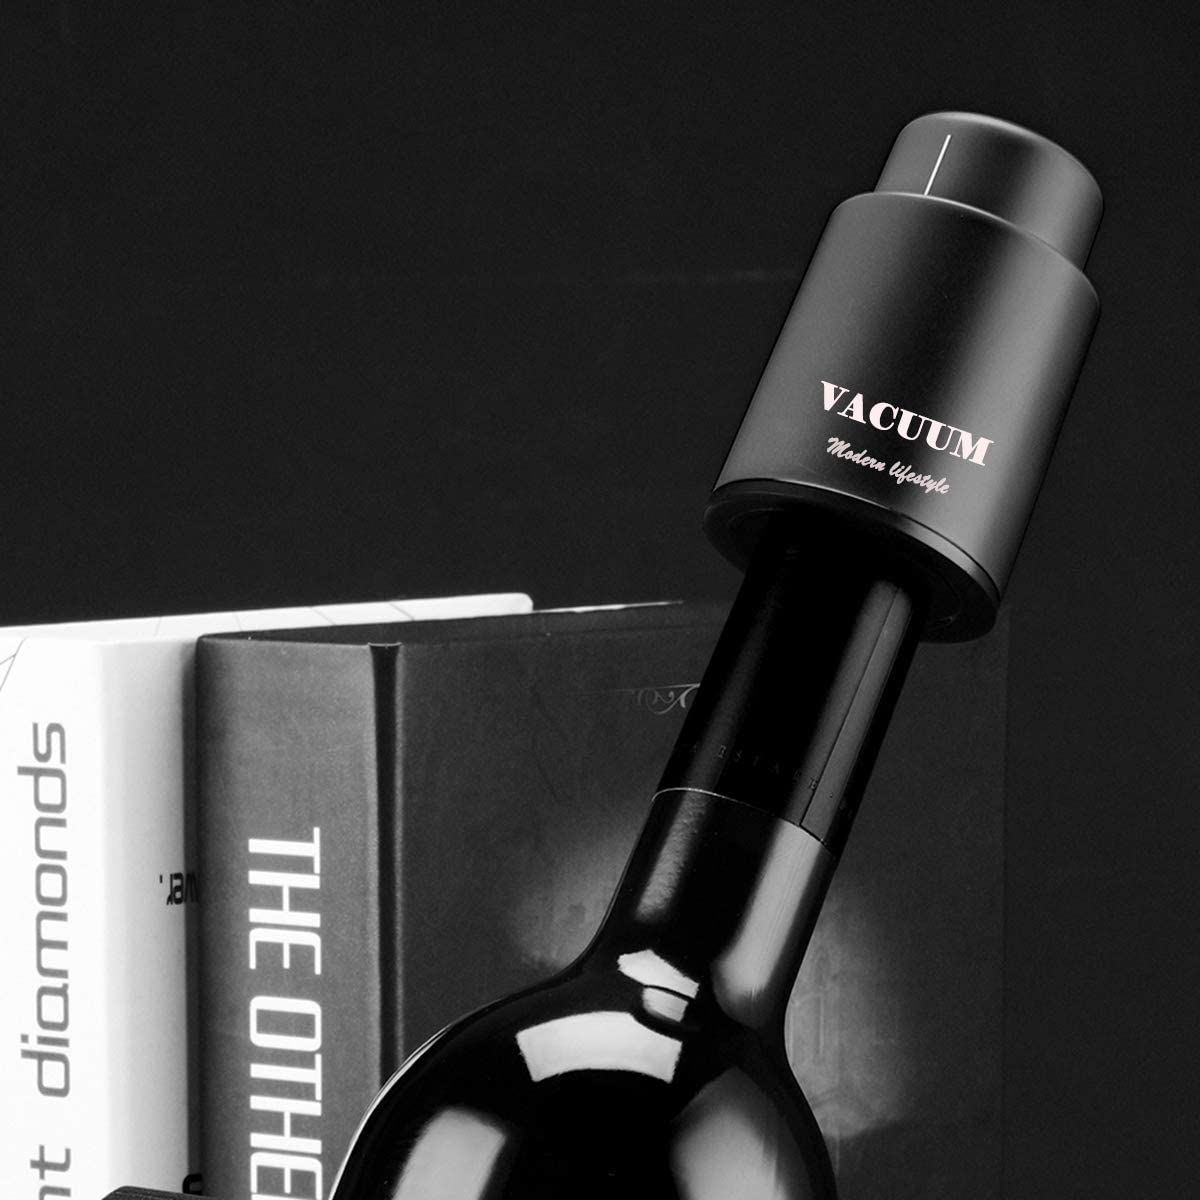 (🔥HOT SALE - 49% OFF) Wine Vacuum Stopper, Buy 2 Get Extra 10% OFF